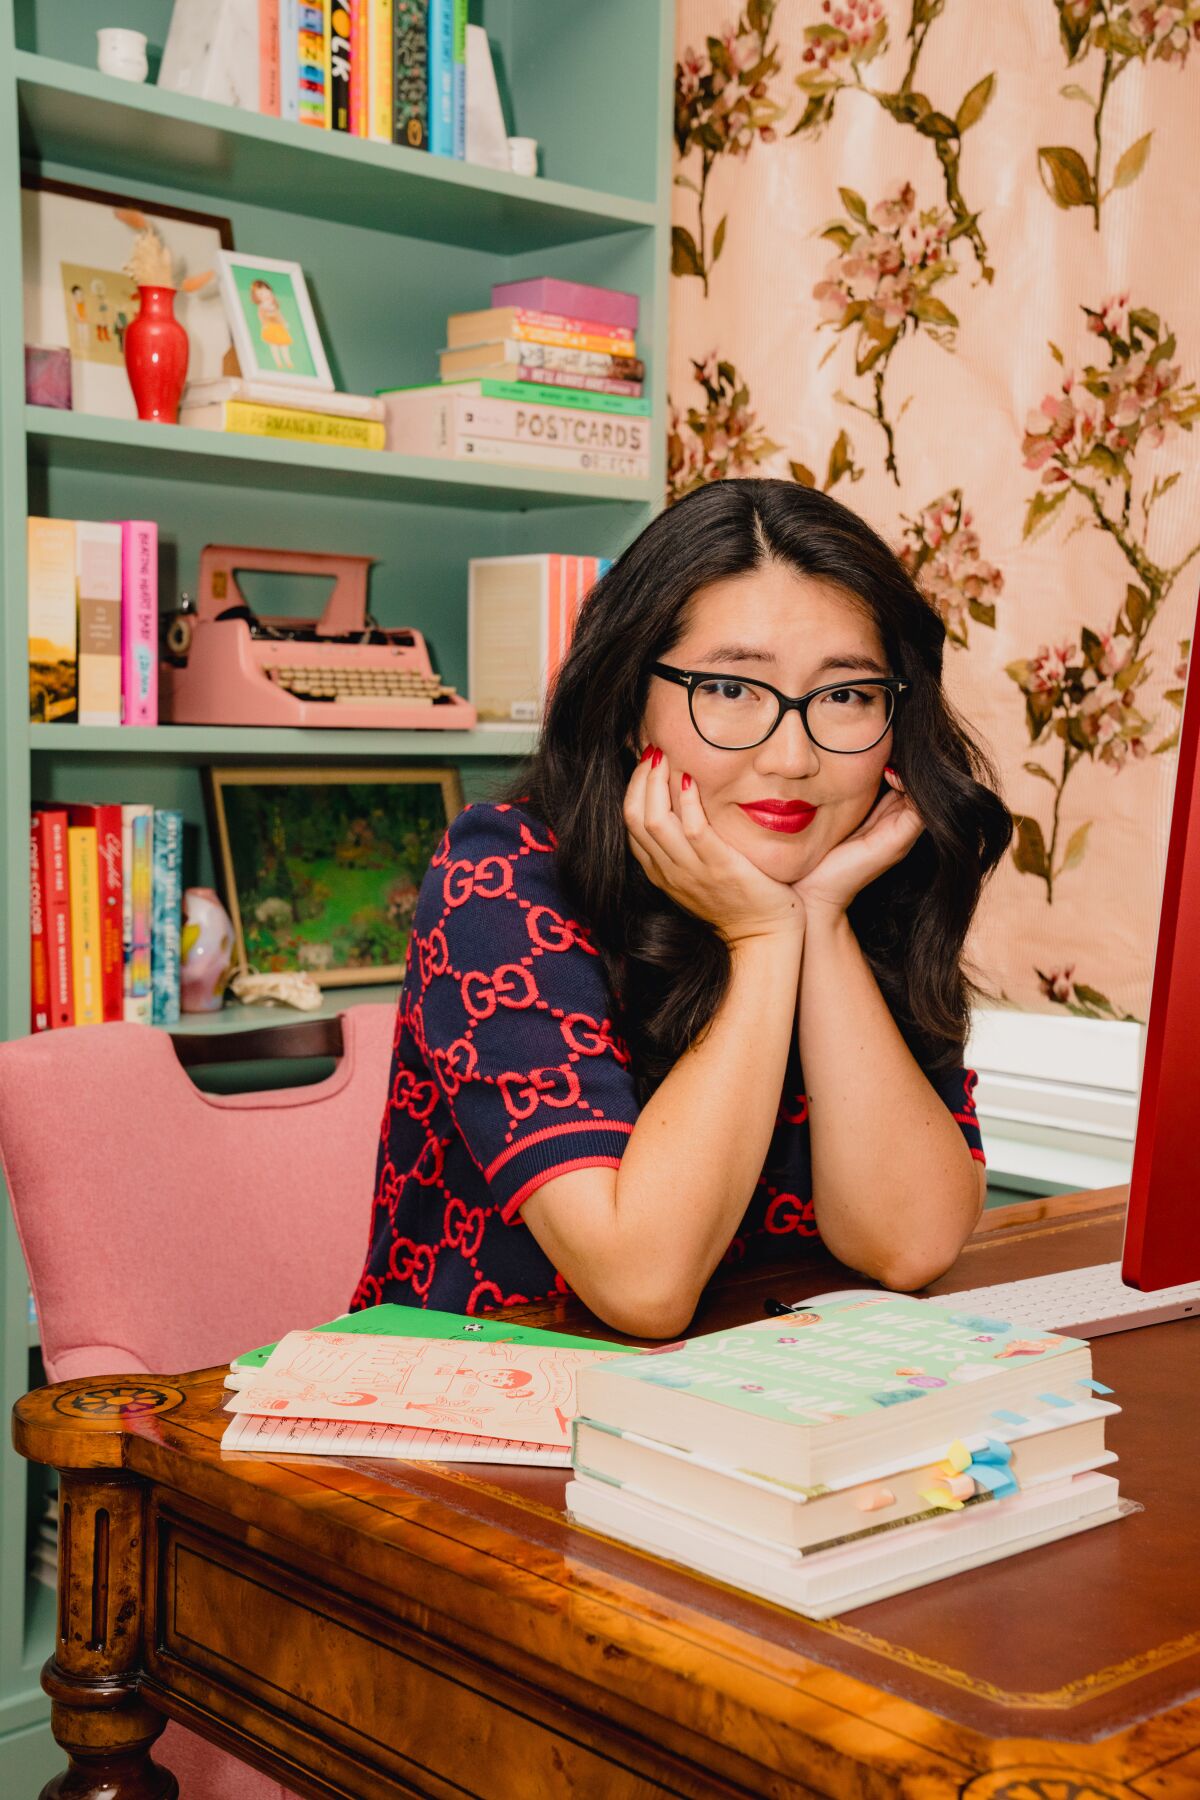 Author Jenny Han seated at a desk with a stack of books, resting her chin in her hands.